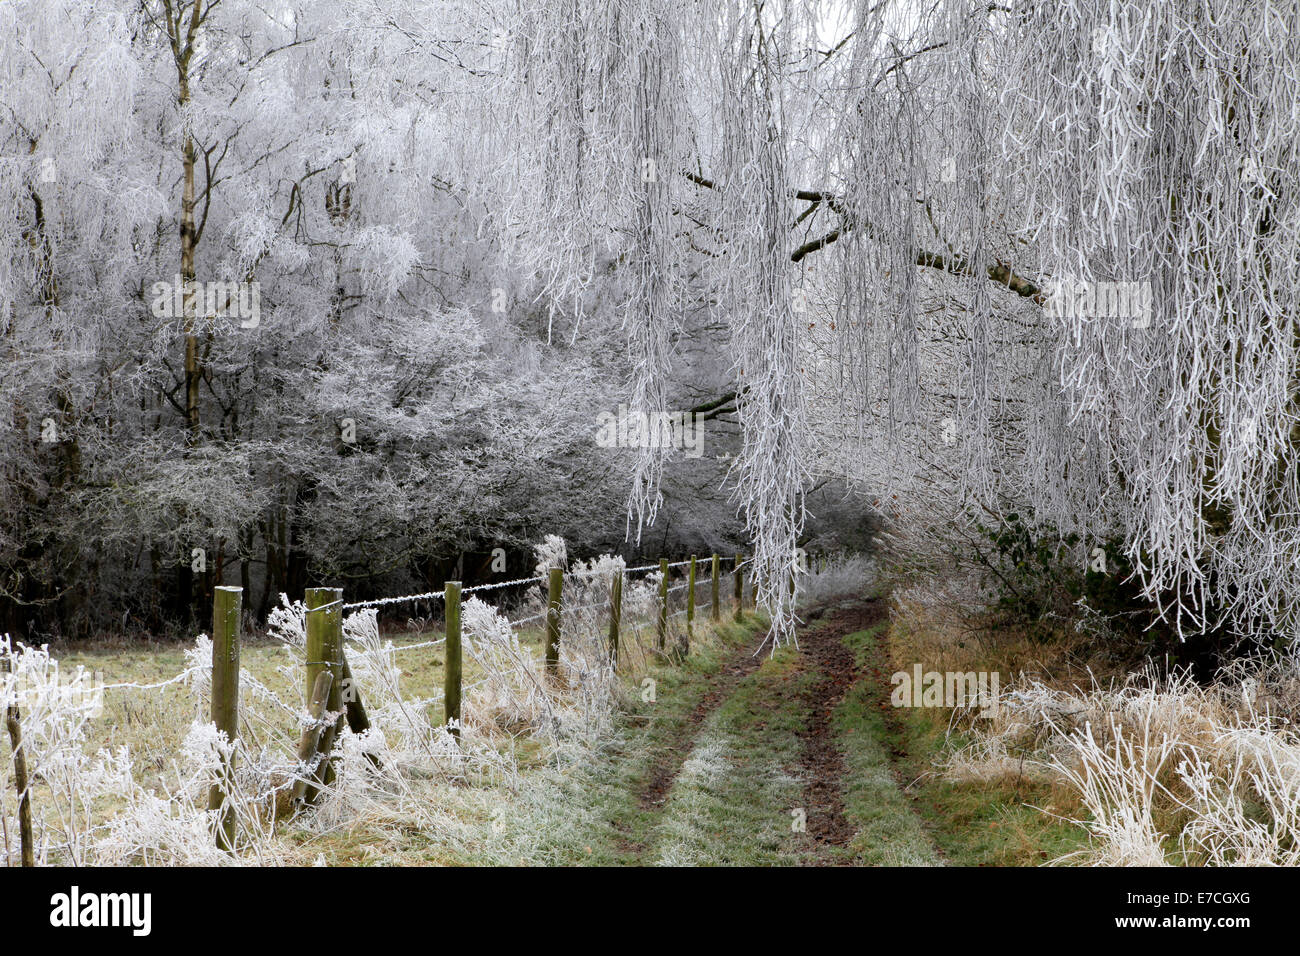 Hoar frost covering the branches of trees in Grovely Wood in Wiltshire, England. Stock Photo